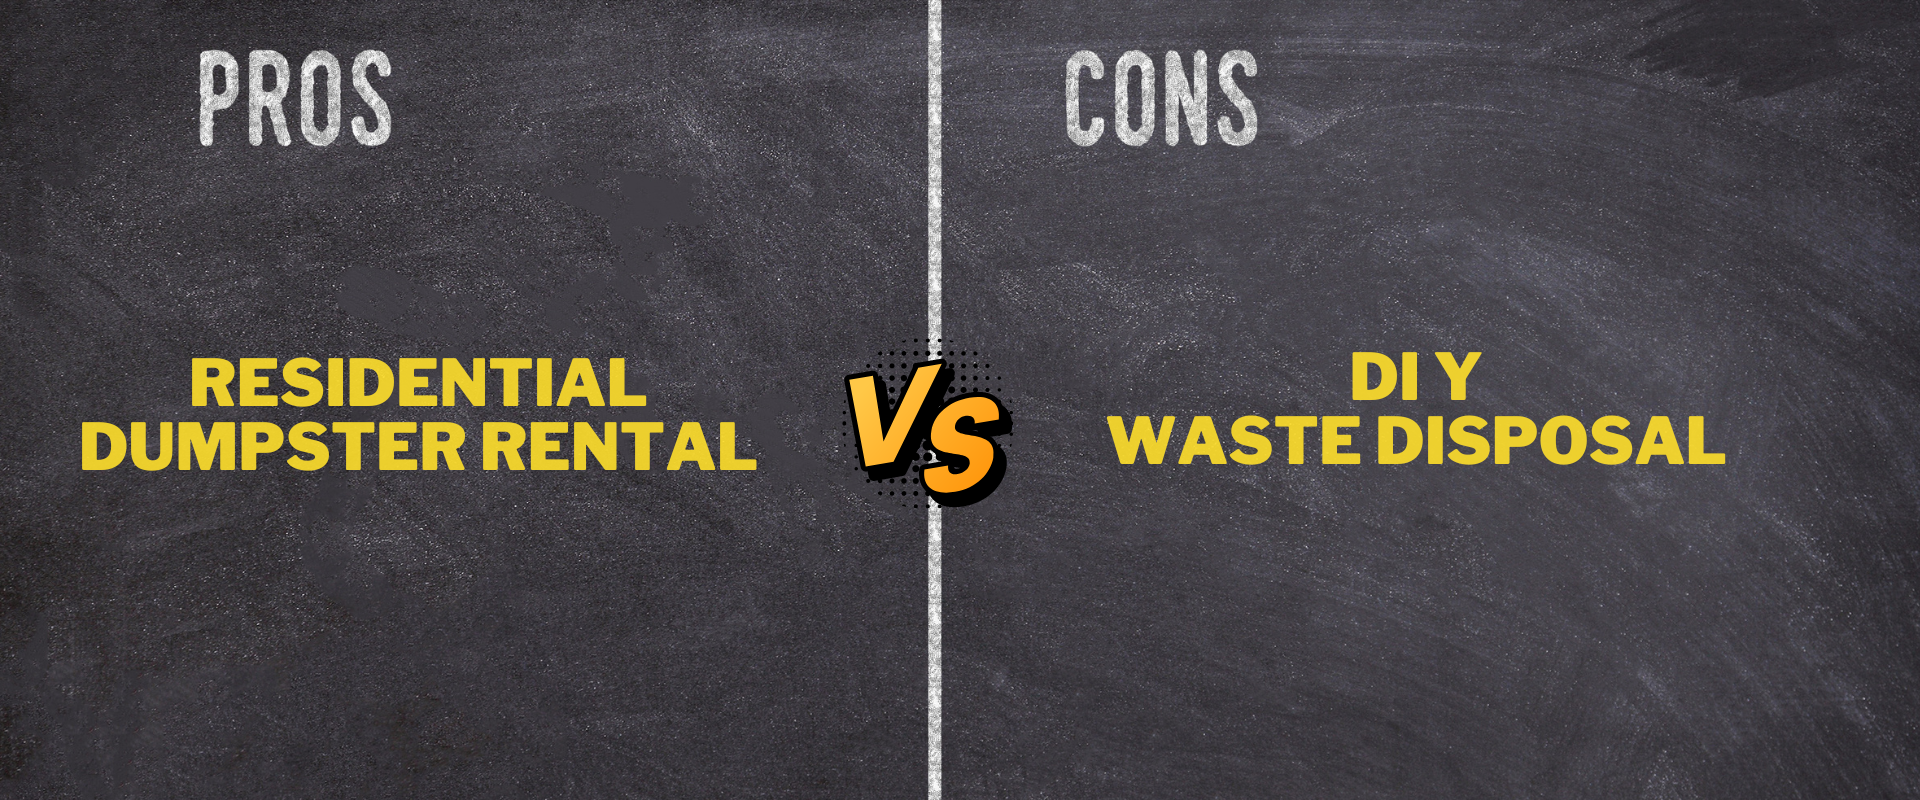 Residential Dumpster Rental vs. DIY Waste Disposal: Pros and Cons